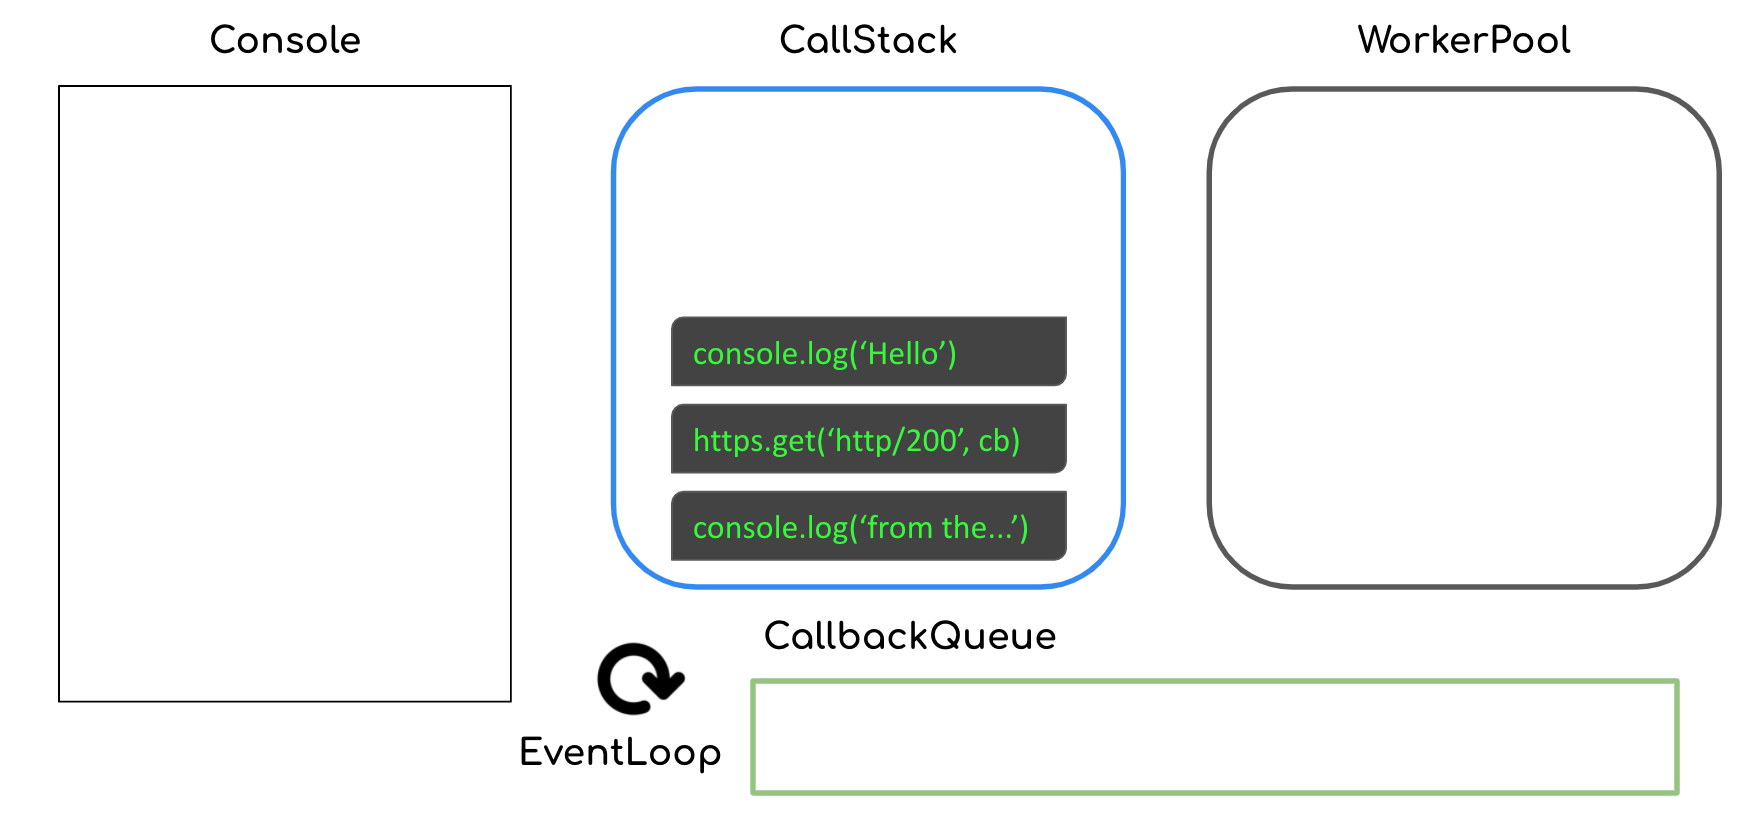 Processing starts with 3 functions in the call stack